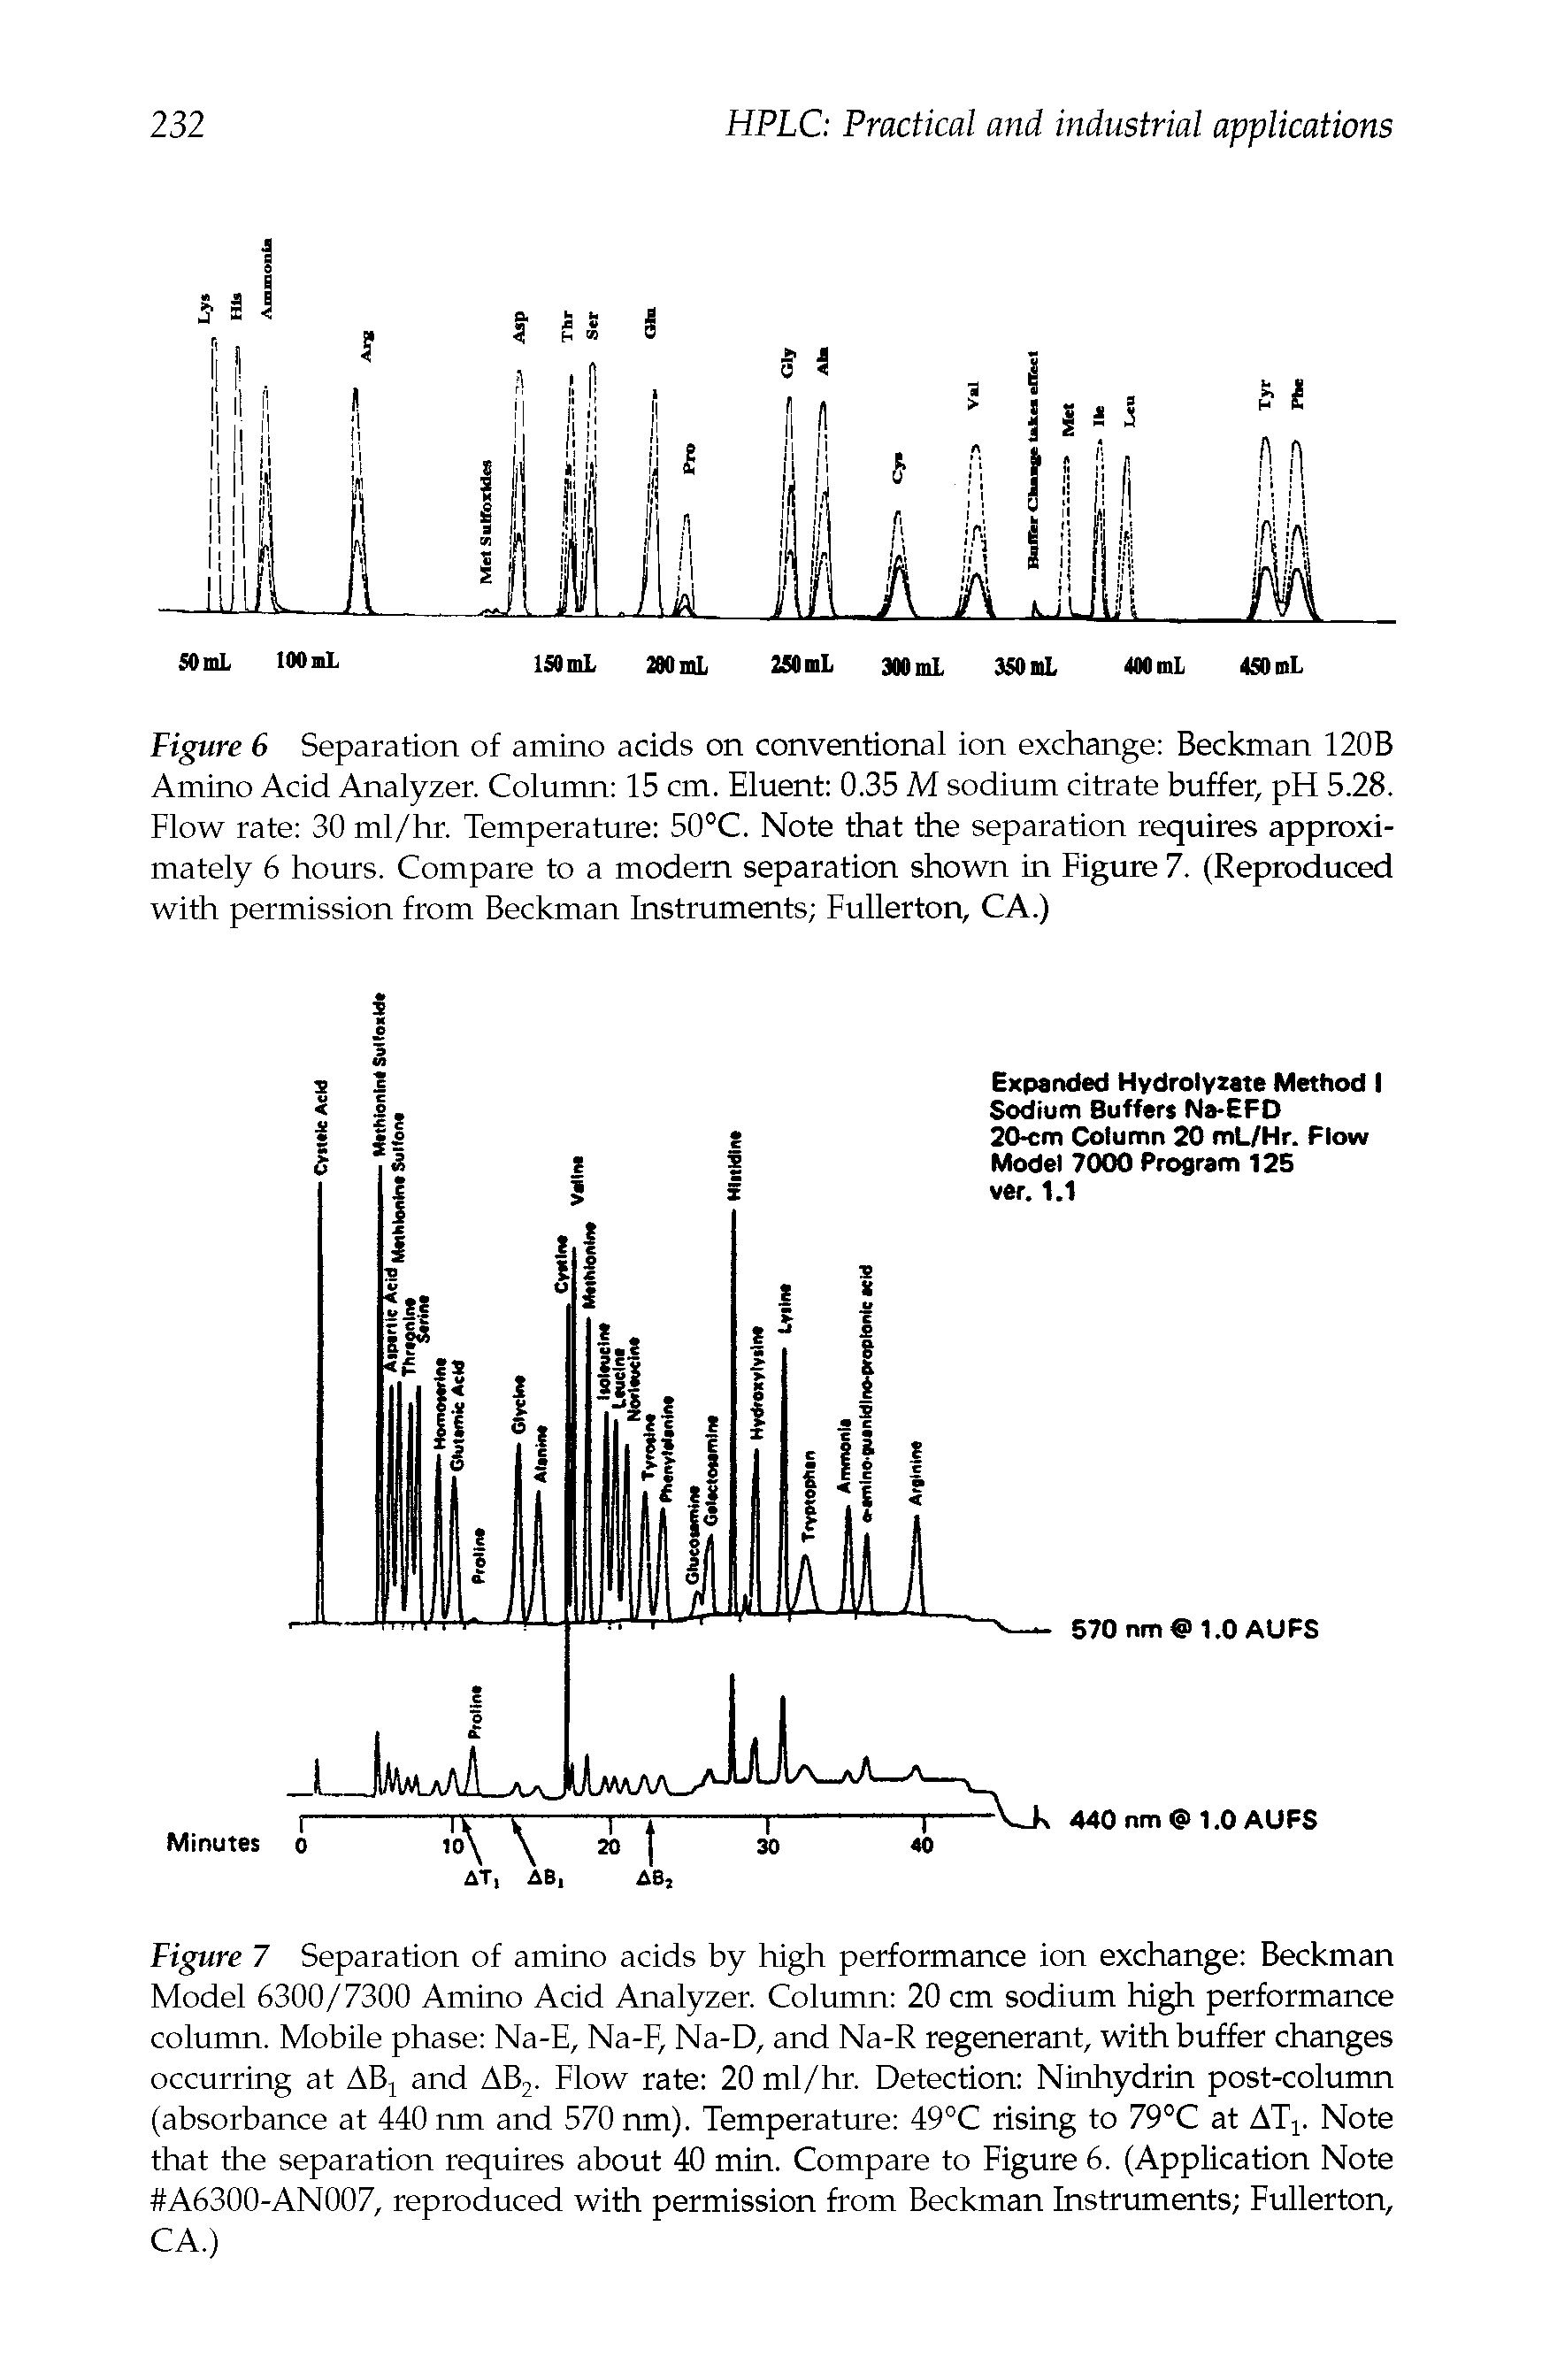 Figure 7 Separation of amino acids by high performance ion exchange Beckman Model 6300/7300 Amino Acid Analyzer. Column 20 cm sodium high performance column. Mobile phase Na-E, Na-F, Na-D, and Na-R regenerant, with buffer changes occurring at ABj and AB2. Flow rate 20 ml/hr. Detection Ninhydrin post-column (absorbance at 440 nm and 570 nm). Temperature 49°C rising to 79°C at AT . Note that the separation requires about 40 min. Compare to Figure 6. (Application Note A6300-AN007, reproduced with permission from Beckman Instruments Fullerton, CA.)...